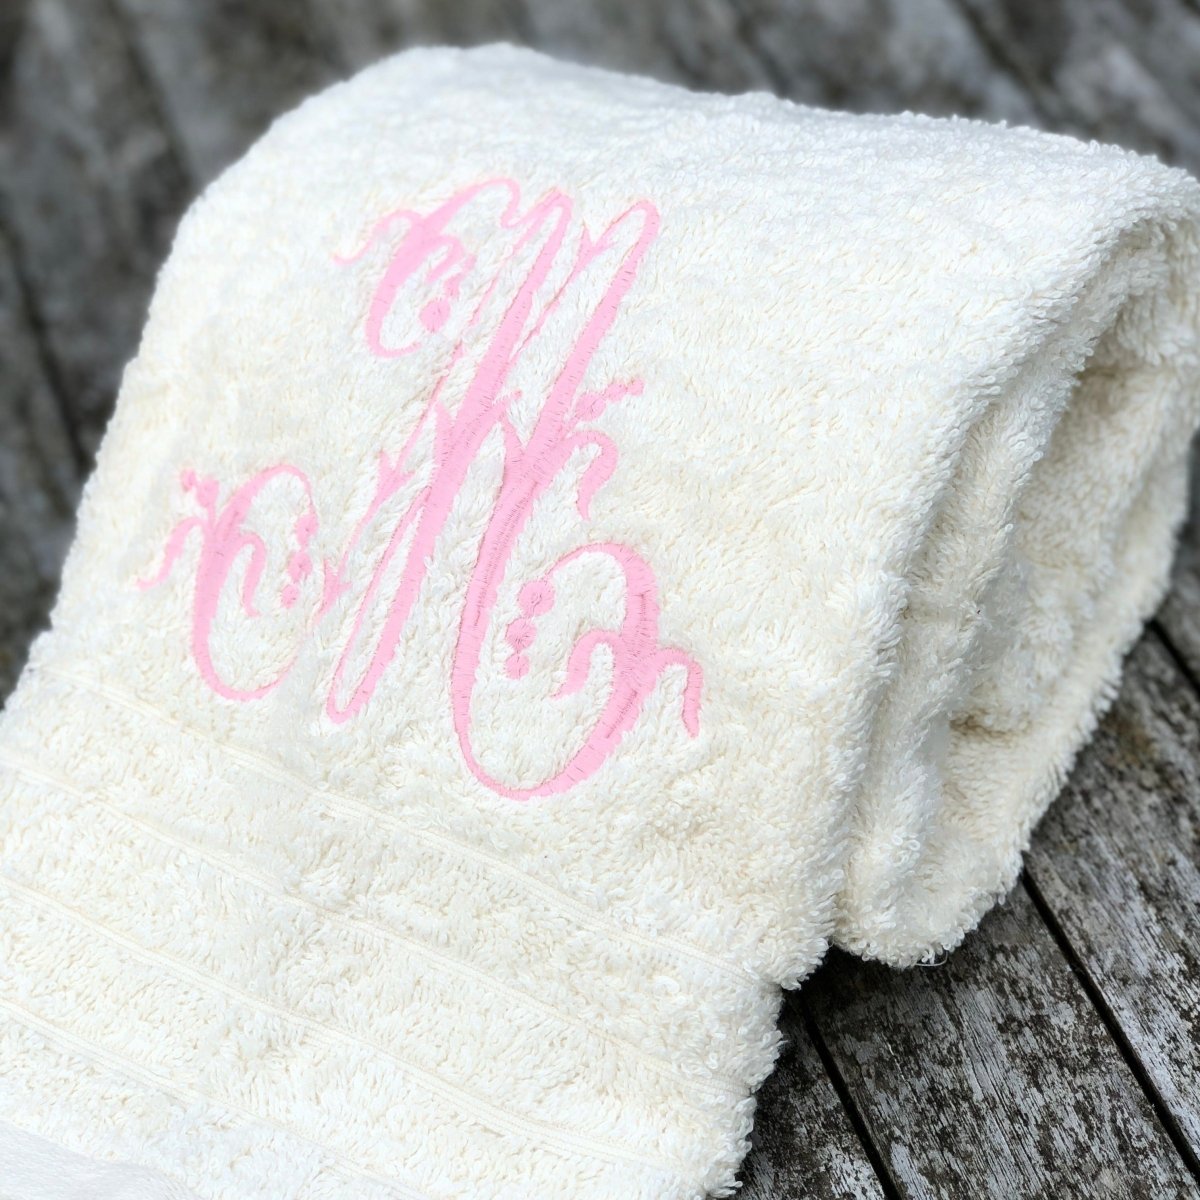 Personalized White Hand Towels With Monogram / Monogrammed